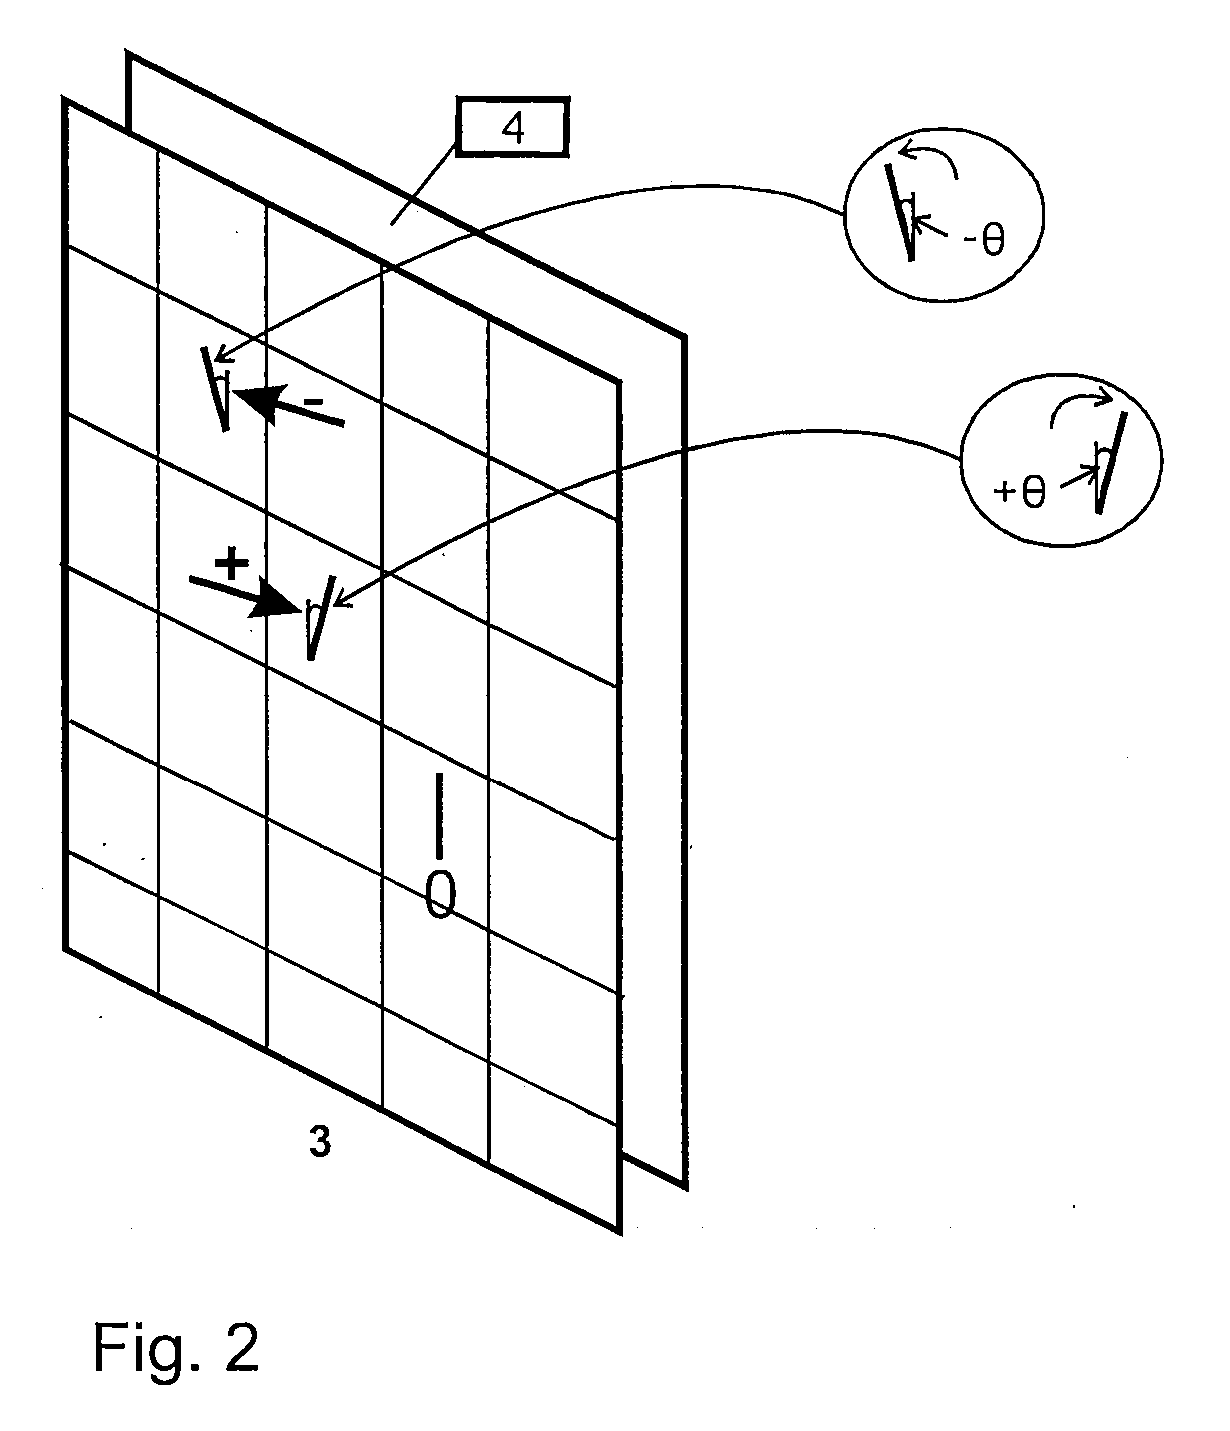 Controllable device for phase modulation